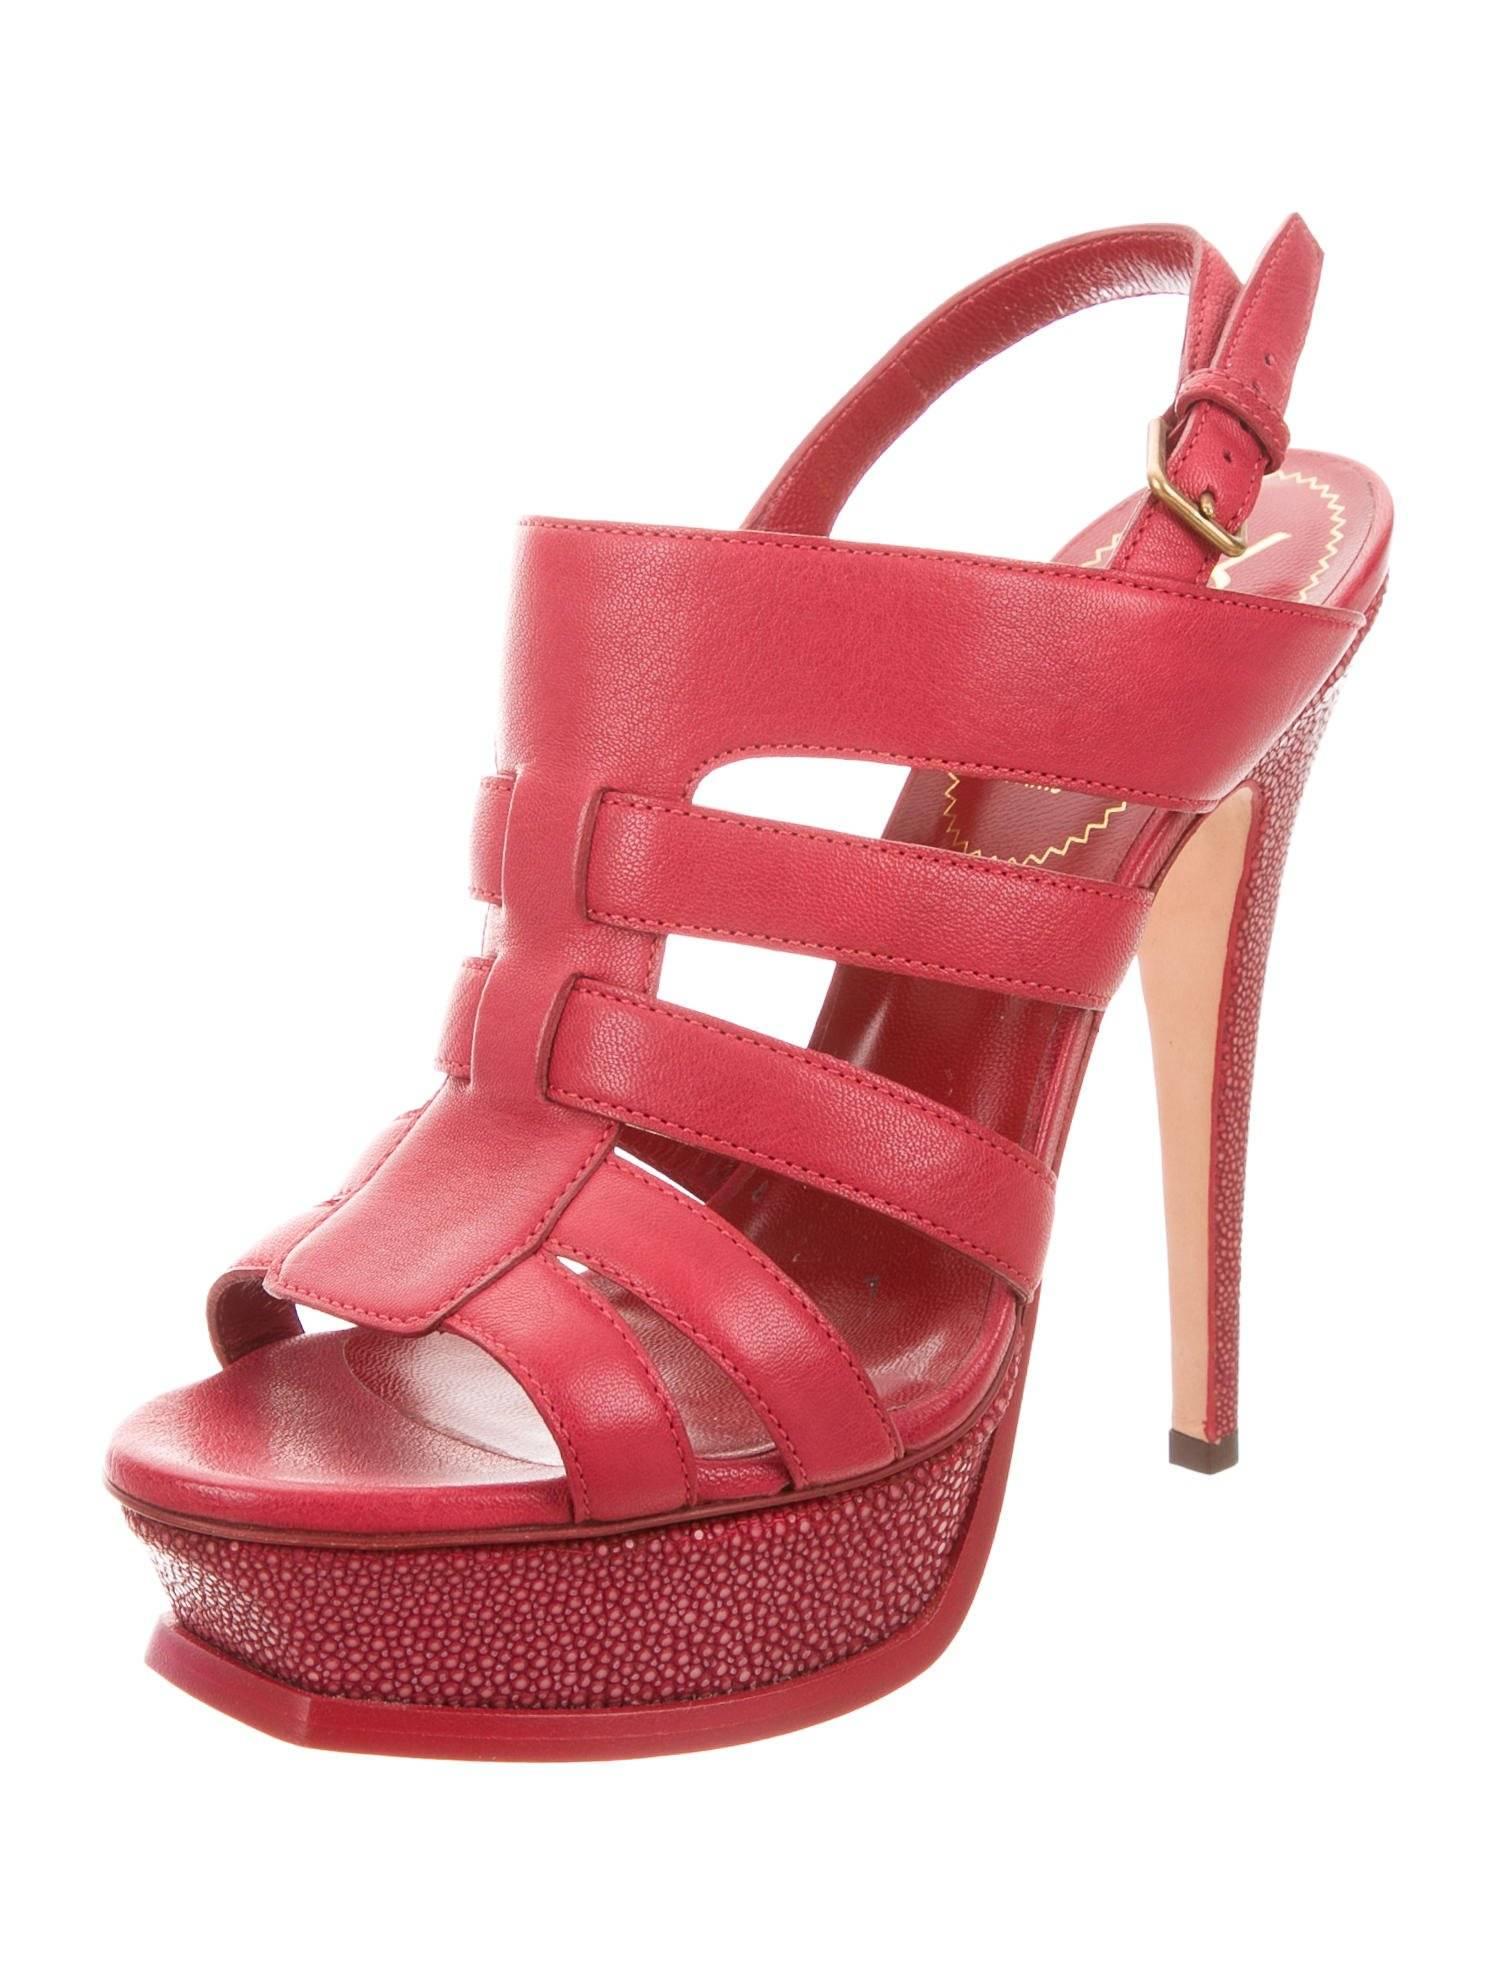 CURATOR'S NOTES

YSL New Red Leather Shark Leather Trim Evening Sandals Heels in Box  

Size IT 38
Leather
Shark trim
Gold tone hardware
Adjustable ankle buckle closure
Platform 1.50"
Heel height 5.75" 
Includes original YSL box